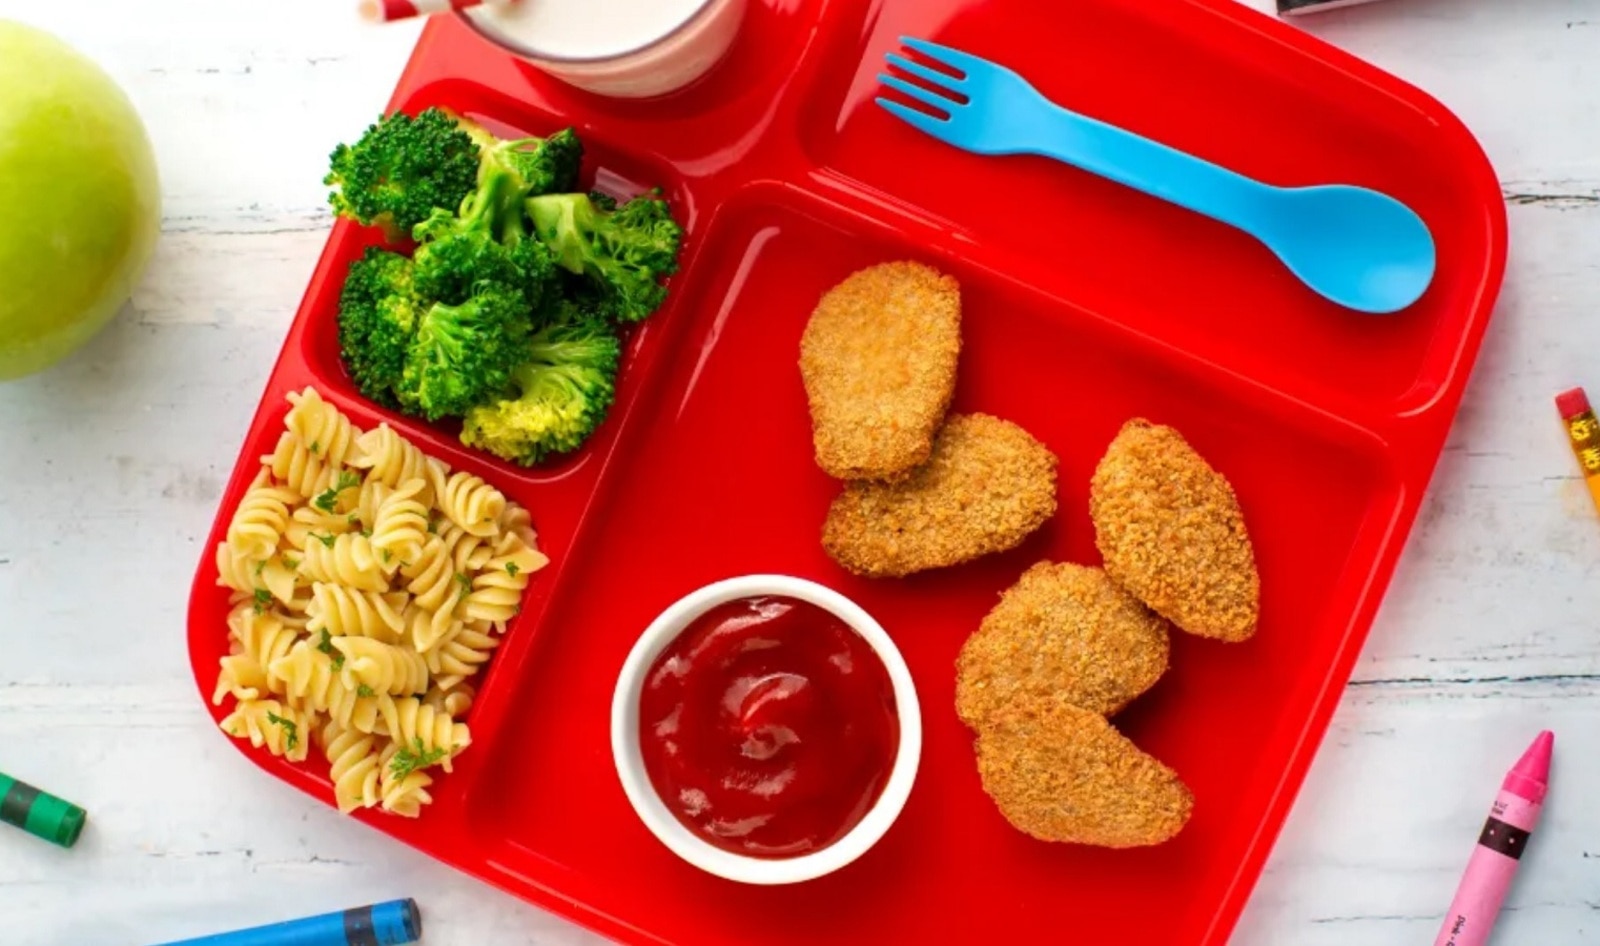 Lunch-Favorite Vegan Chicken Nuggets Go Back to School for 2 Million Students&nbsp;